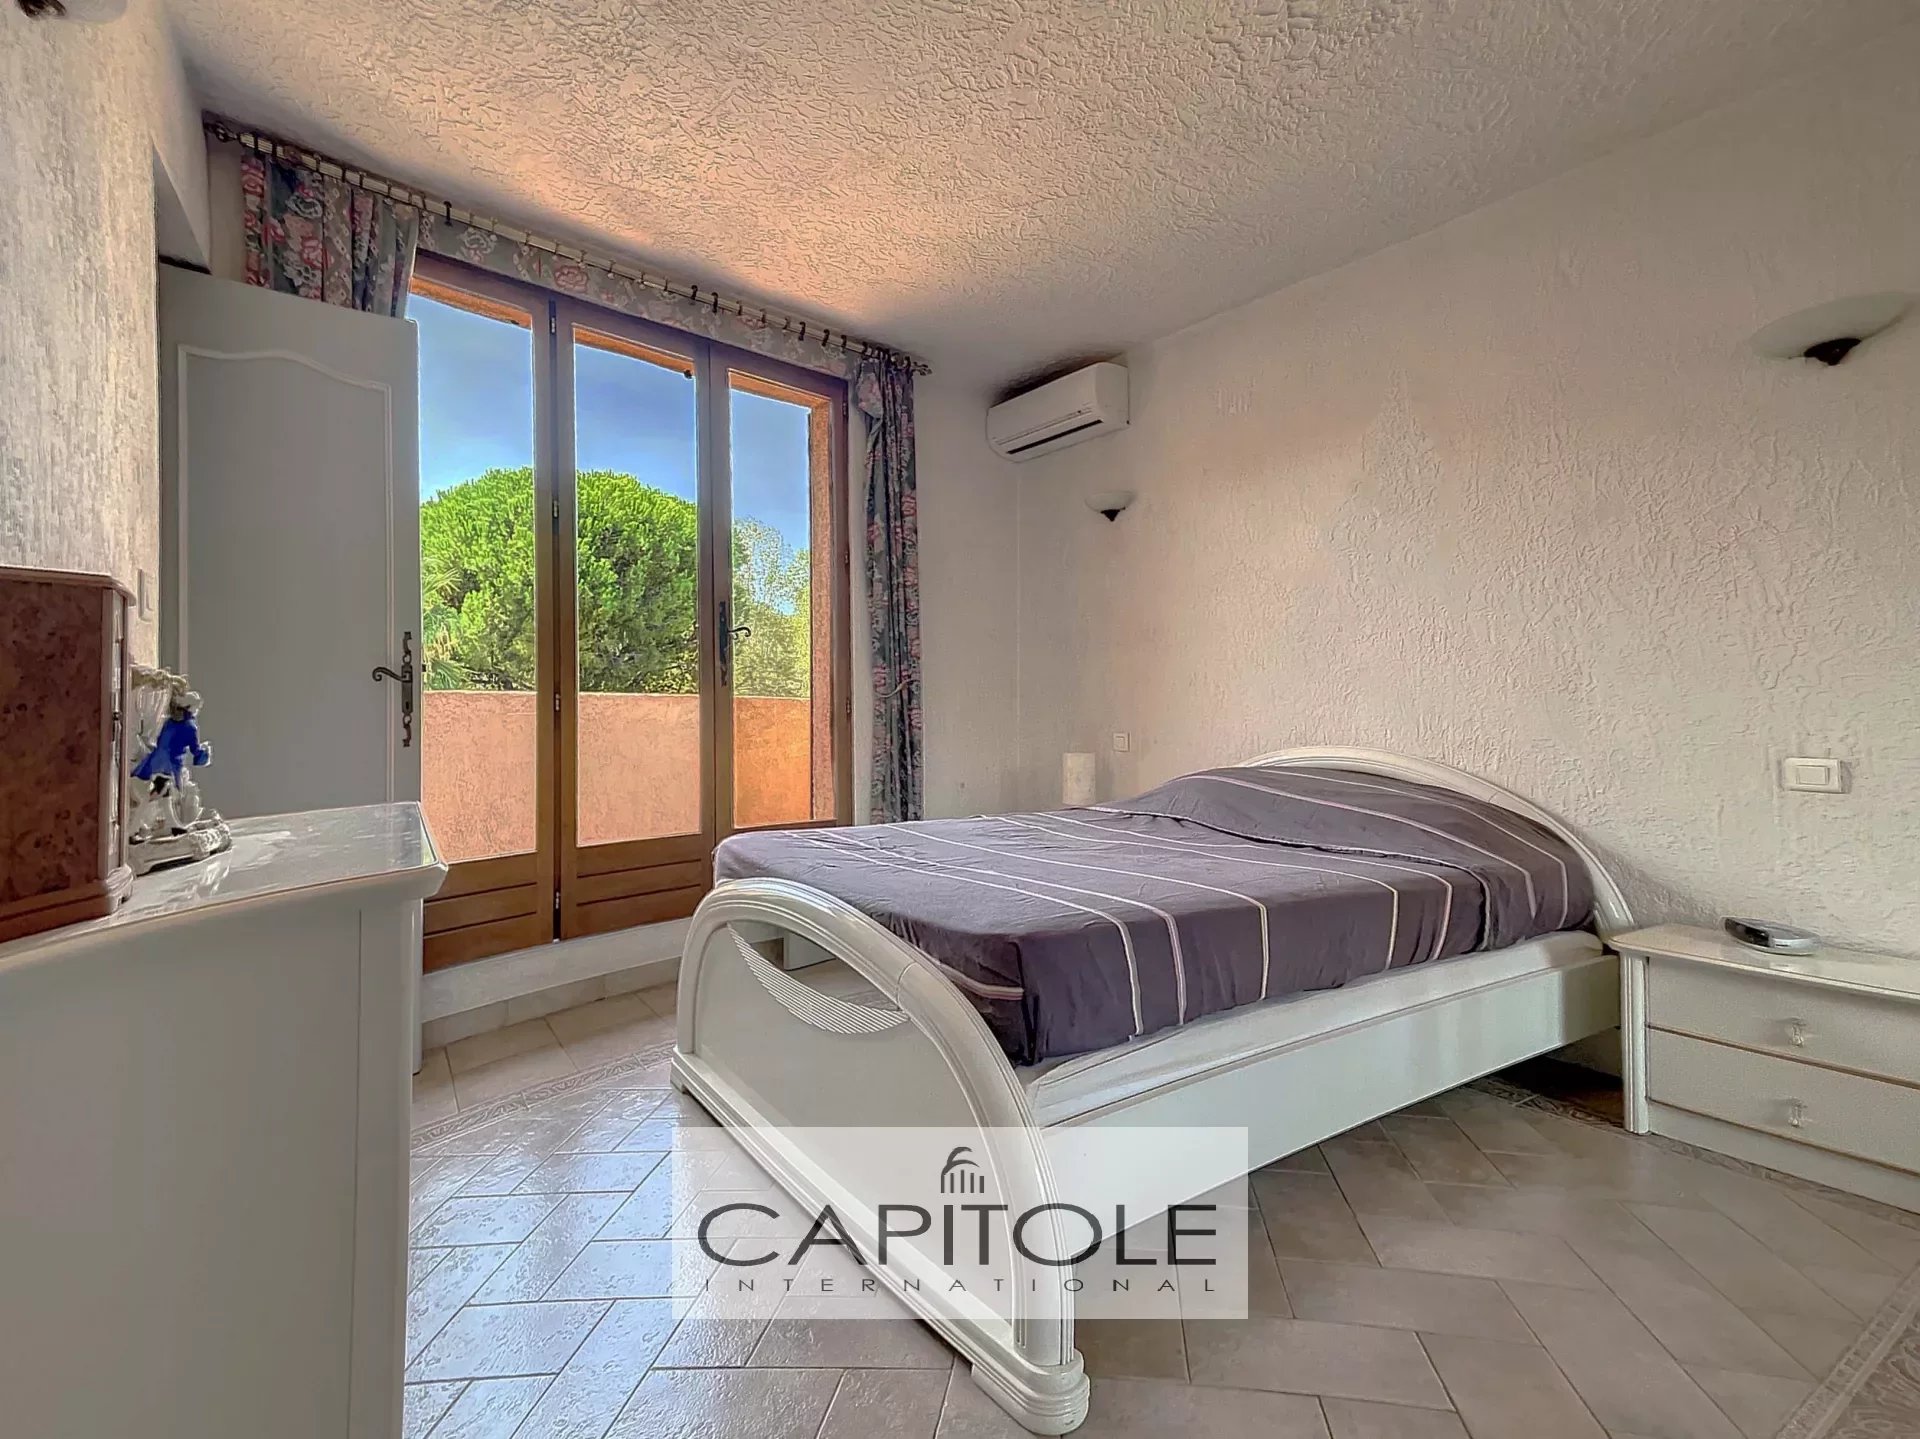 Antibes-  For sale  4 bedroom villa with an independant 1 bedroom apartment